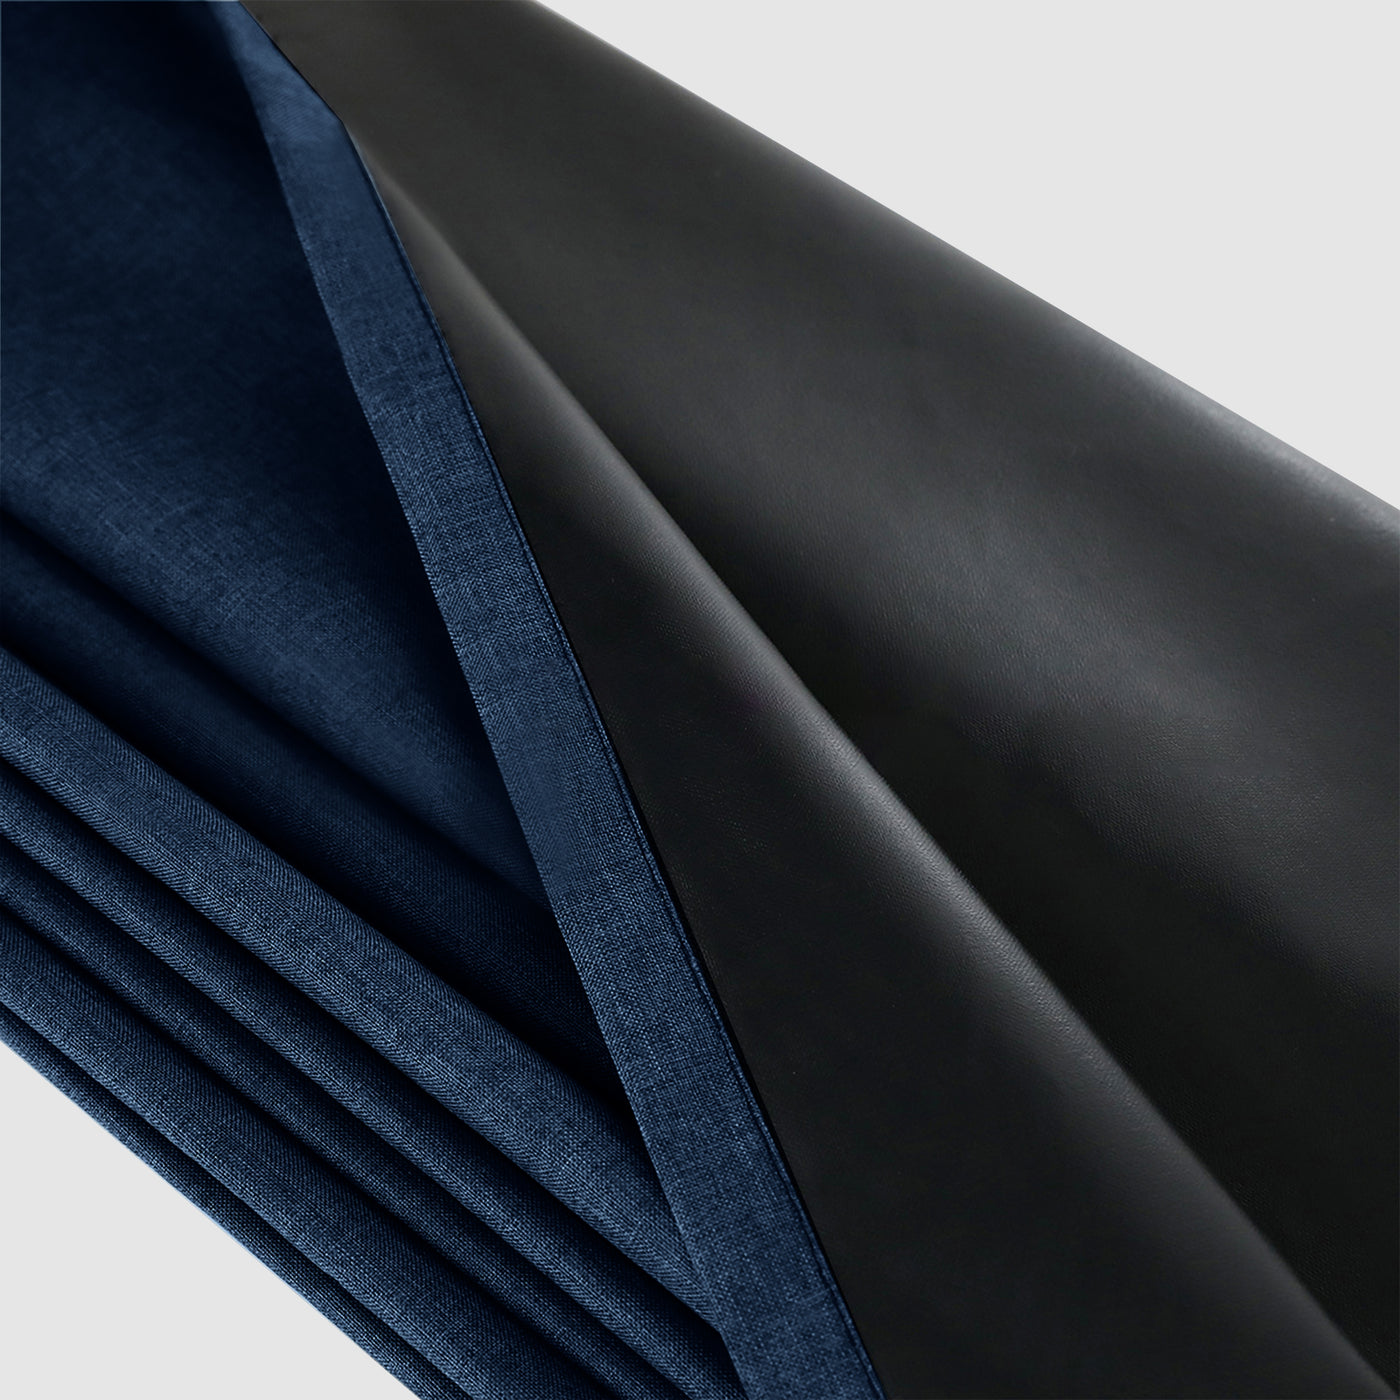 Heartcosy Blackout Curtains Navy Blue - Grommet Top